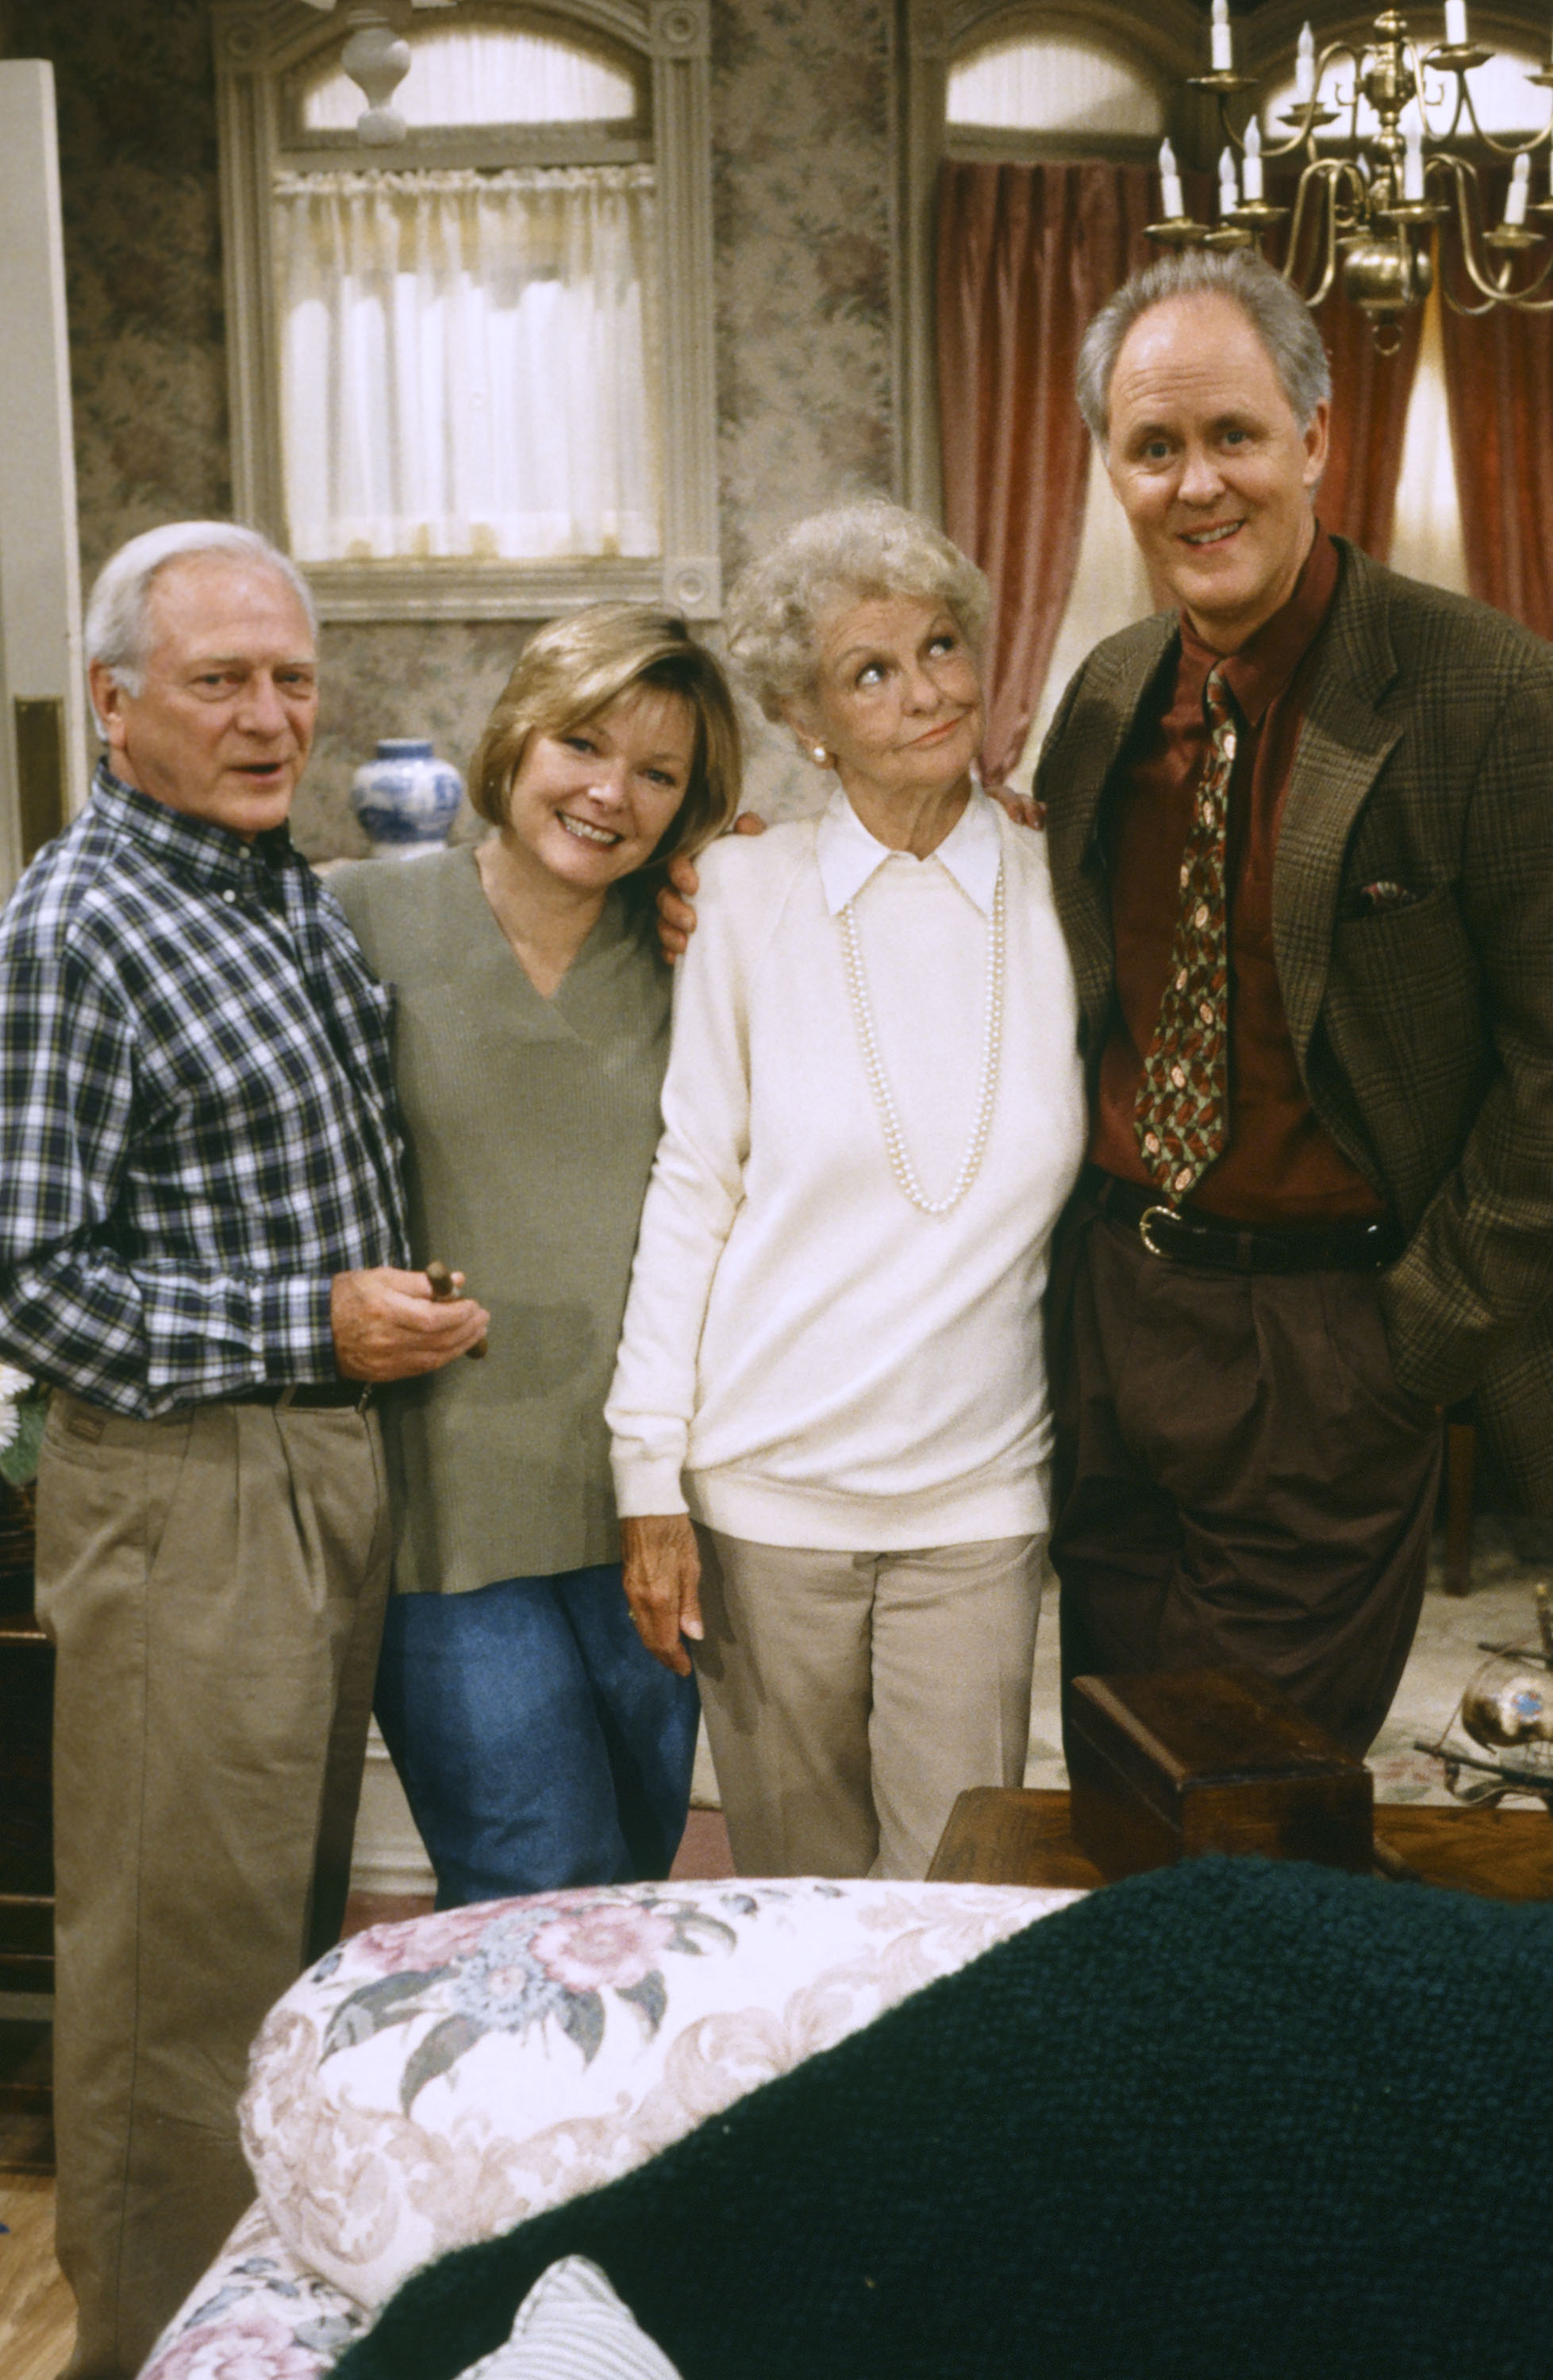 Still of John Lithgow, Jane Curtin, George Grizzard and Elaine Stritch in Trecias luitas nuo saules (1996)